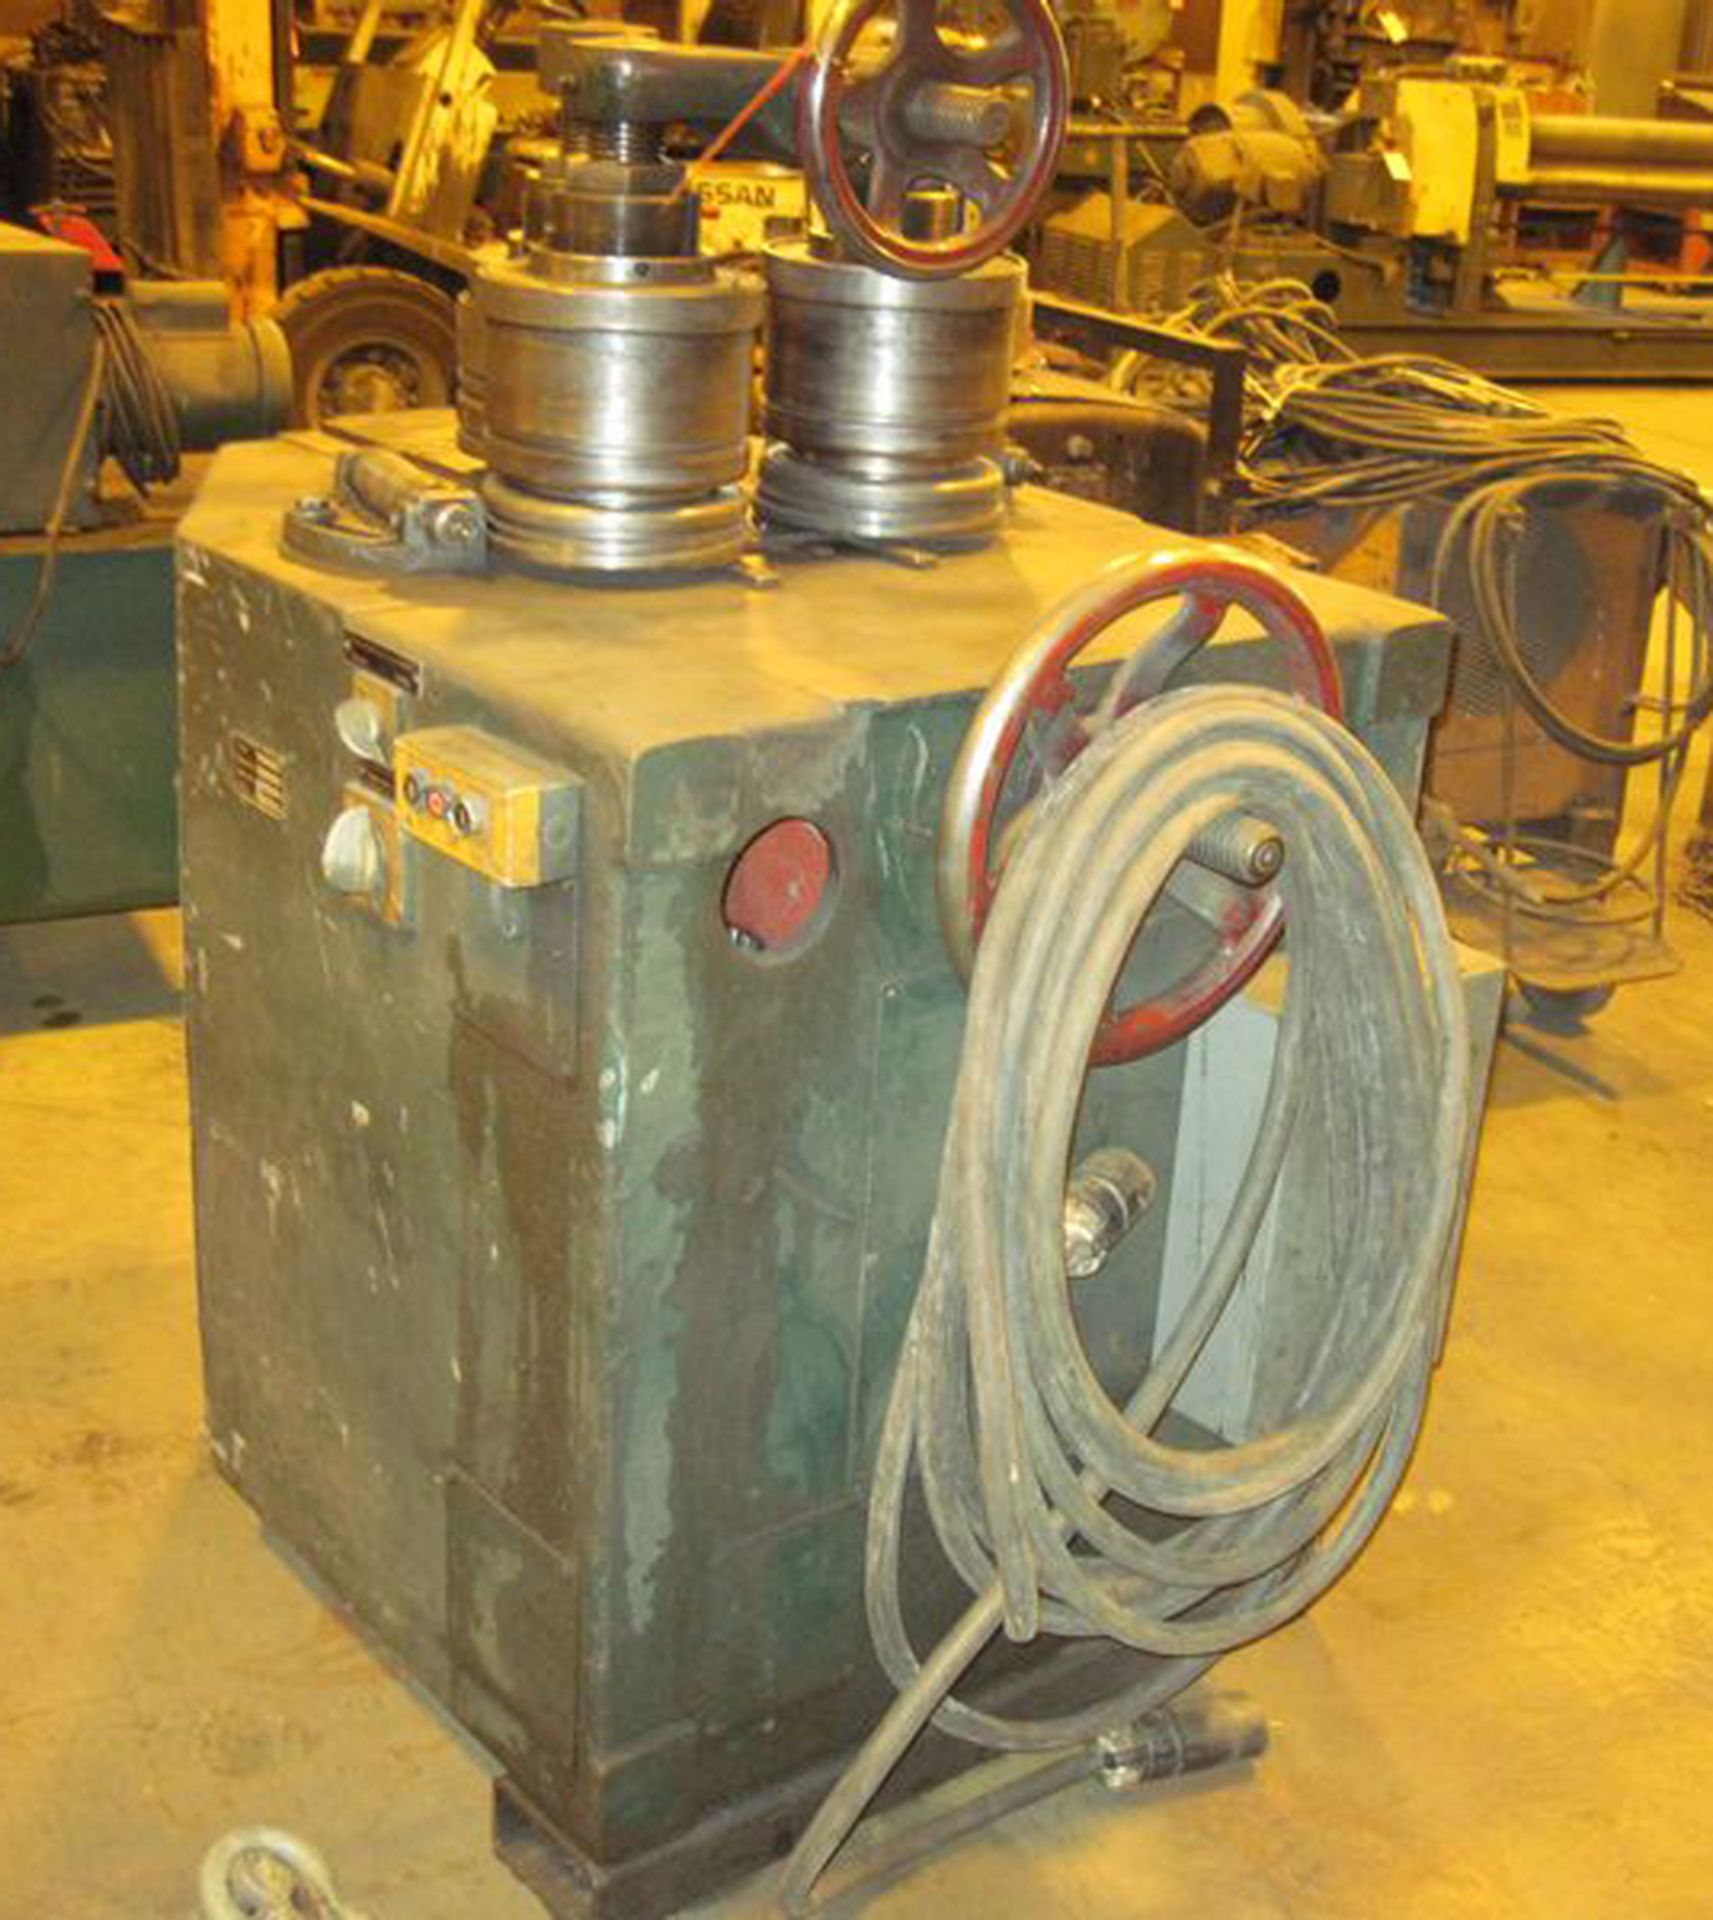 Herkules Hydraulic Angle Roll, 2 1/2" x 2 1/2" x 1/4", Mdl: 80239N, S/N: 74075 - Painesville, OH - - Image 2 of 4